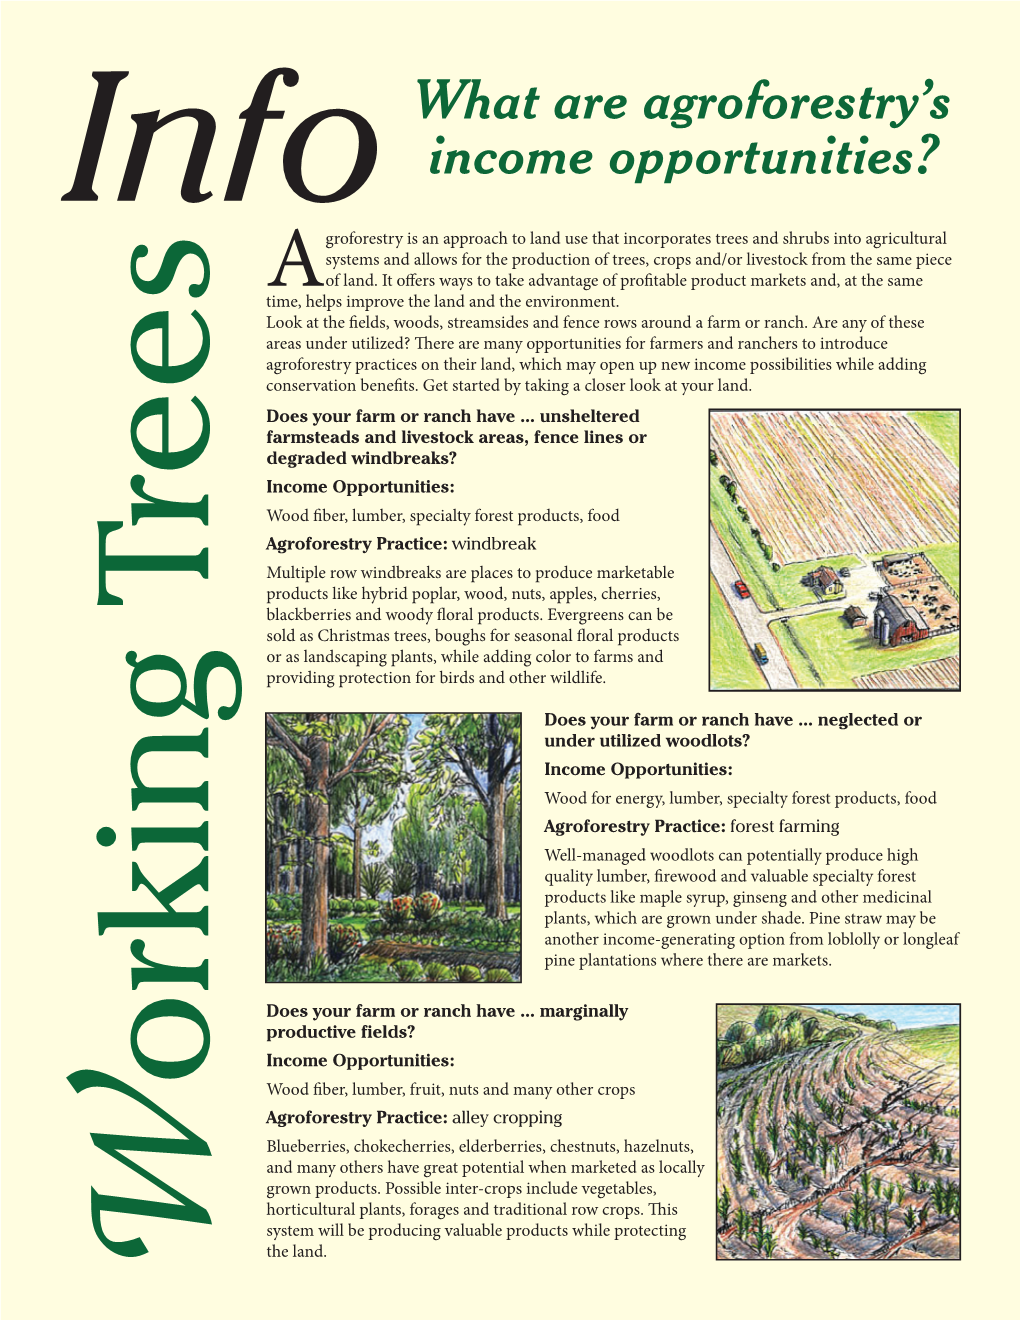 What Are Agroforestry's Income Opportunities